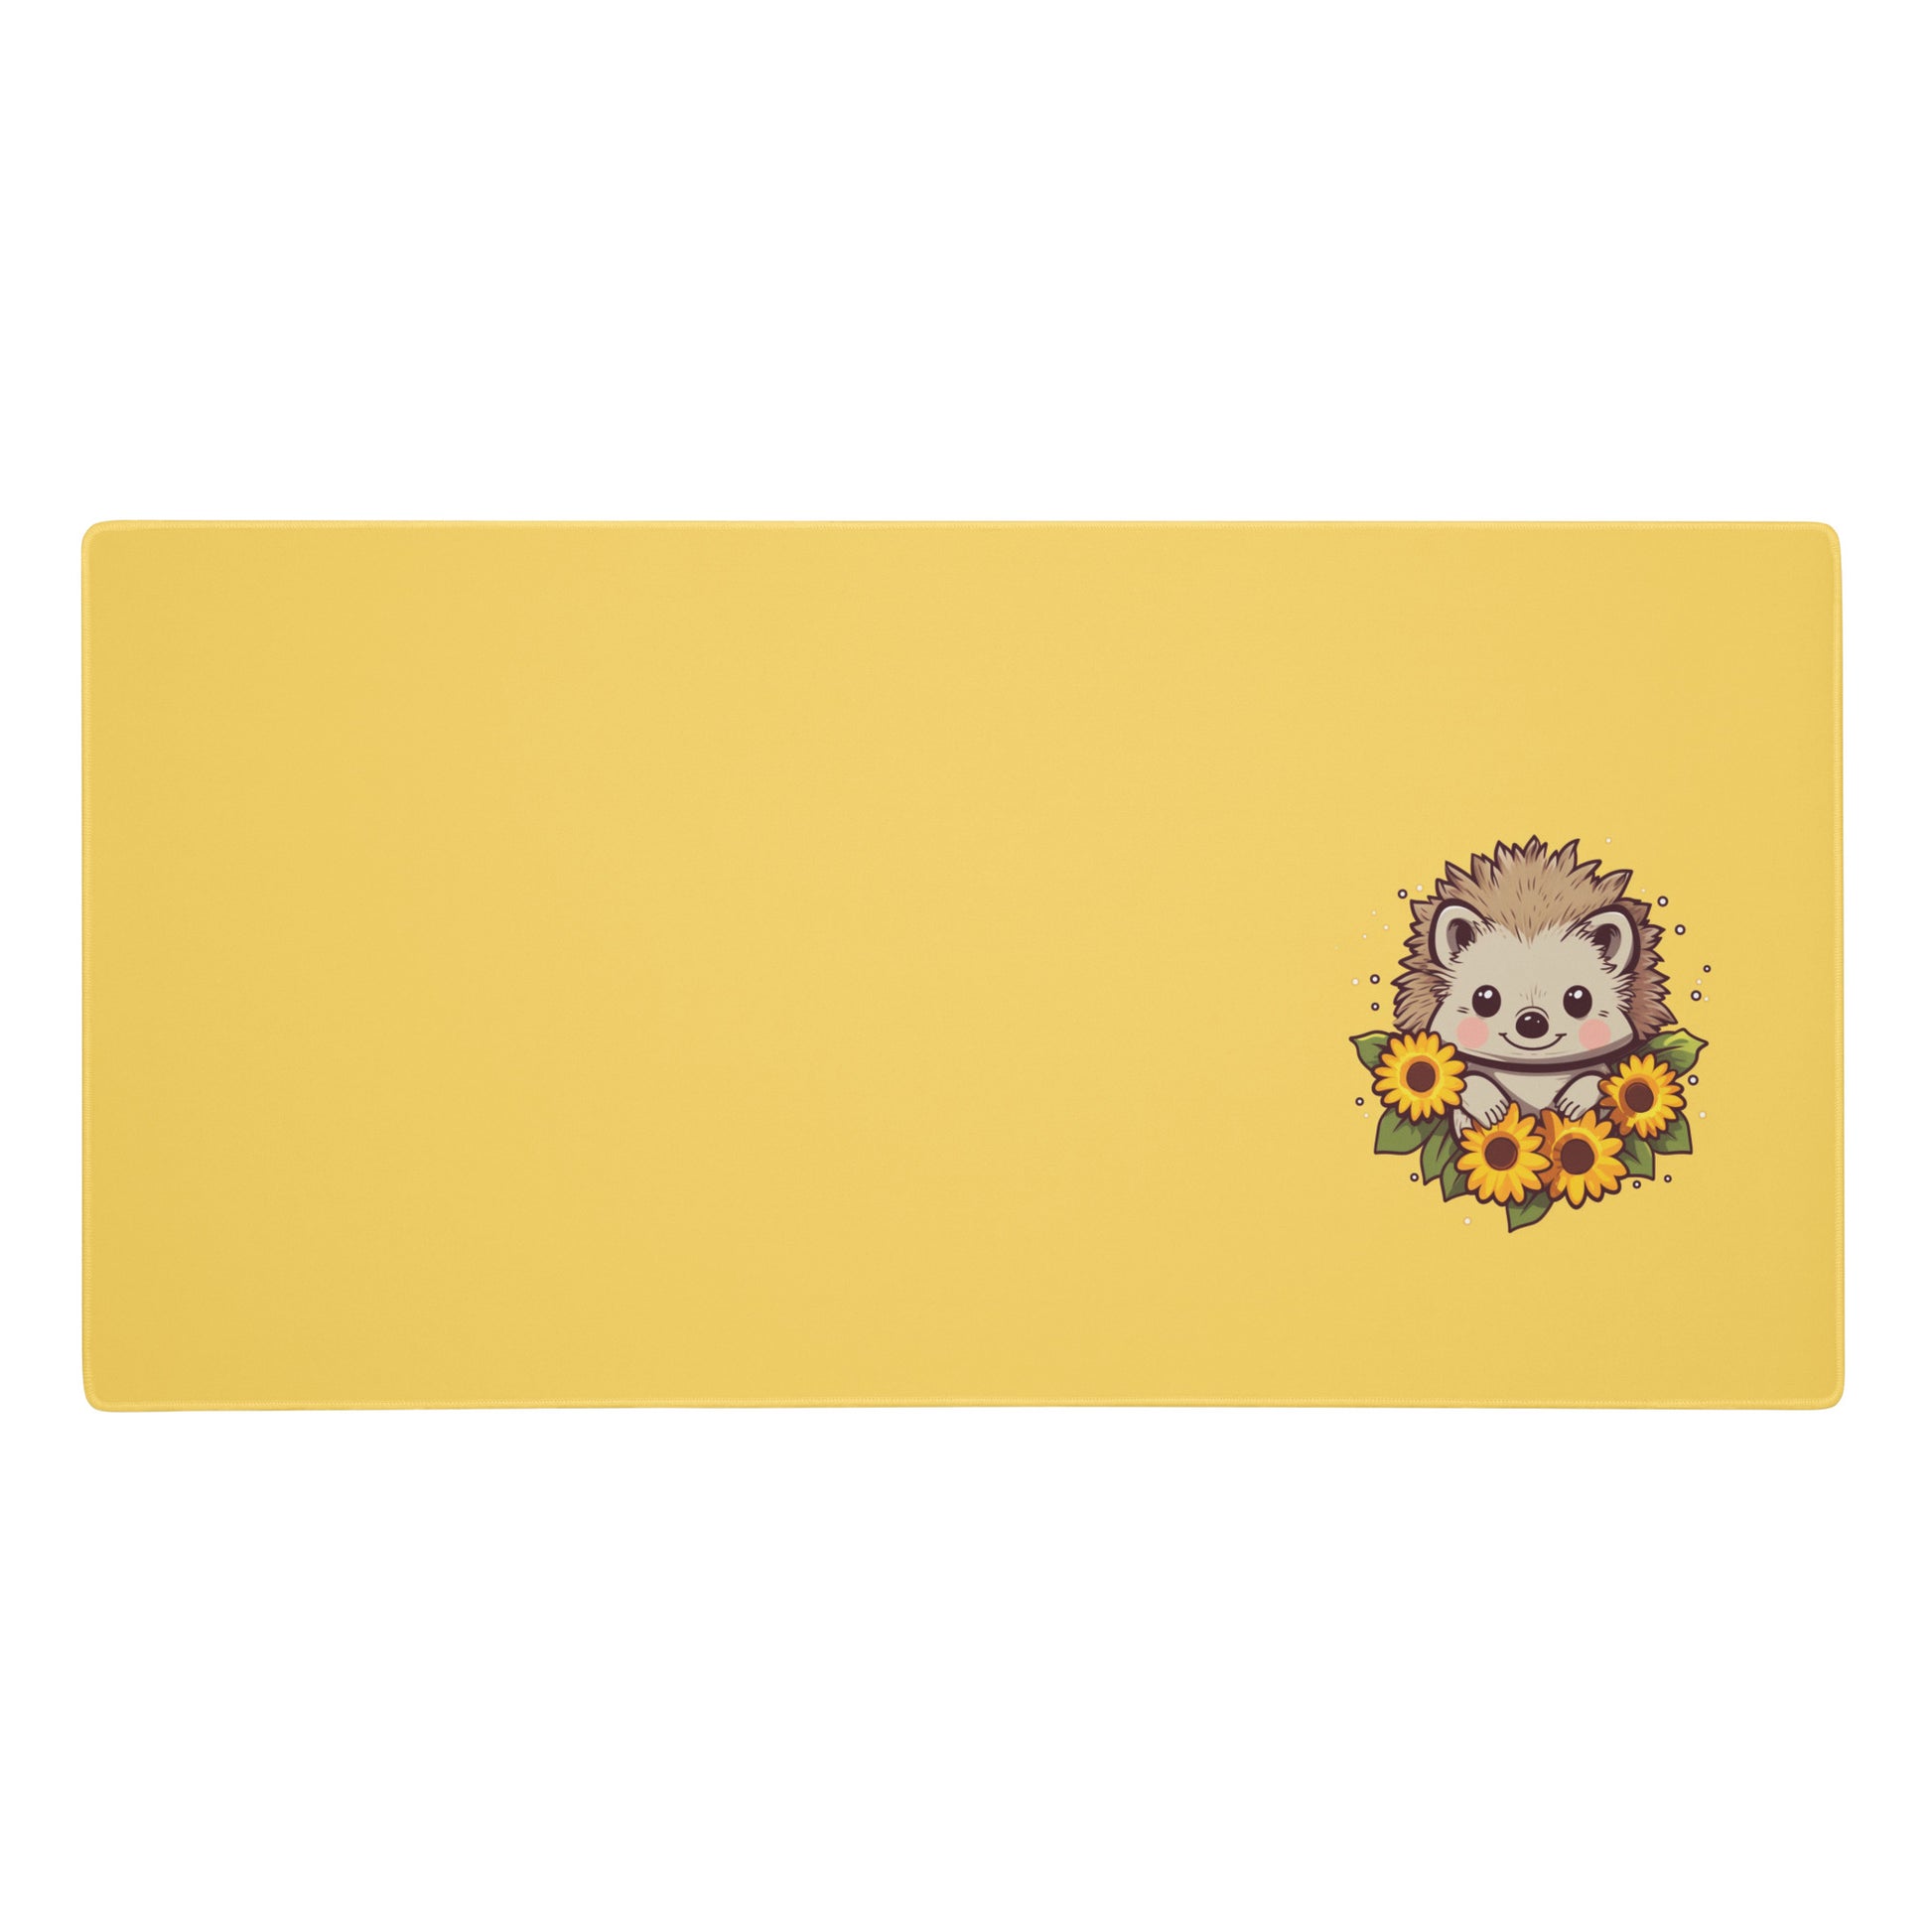 A 36" x 18" desk pad with a cute hedgehog surrounded by sunflowers on it. Yellow in color.